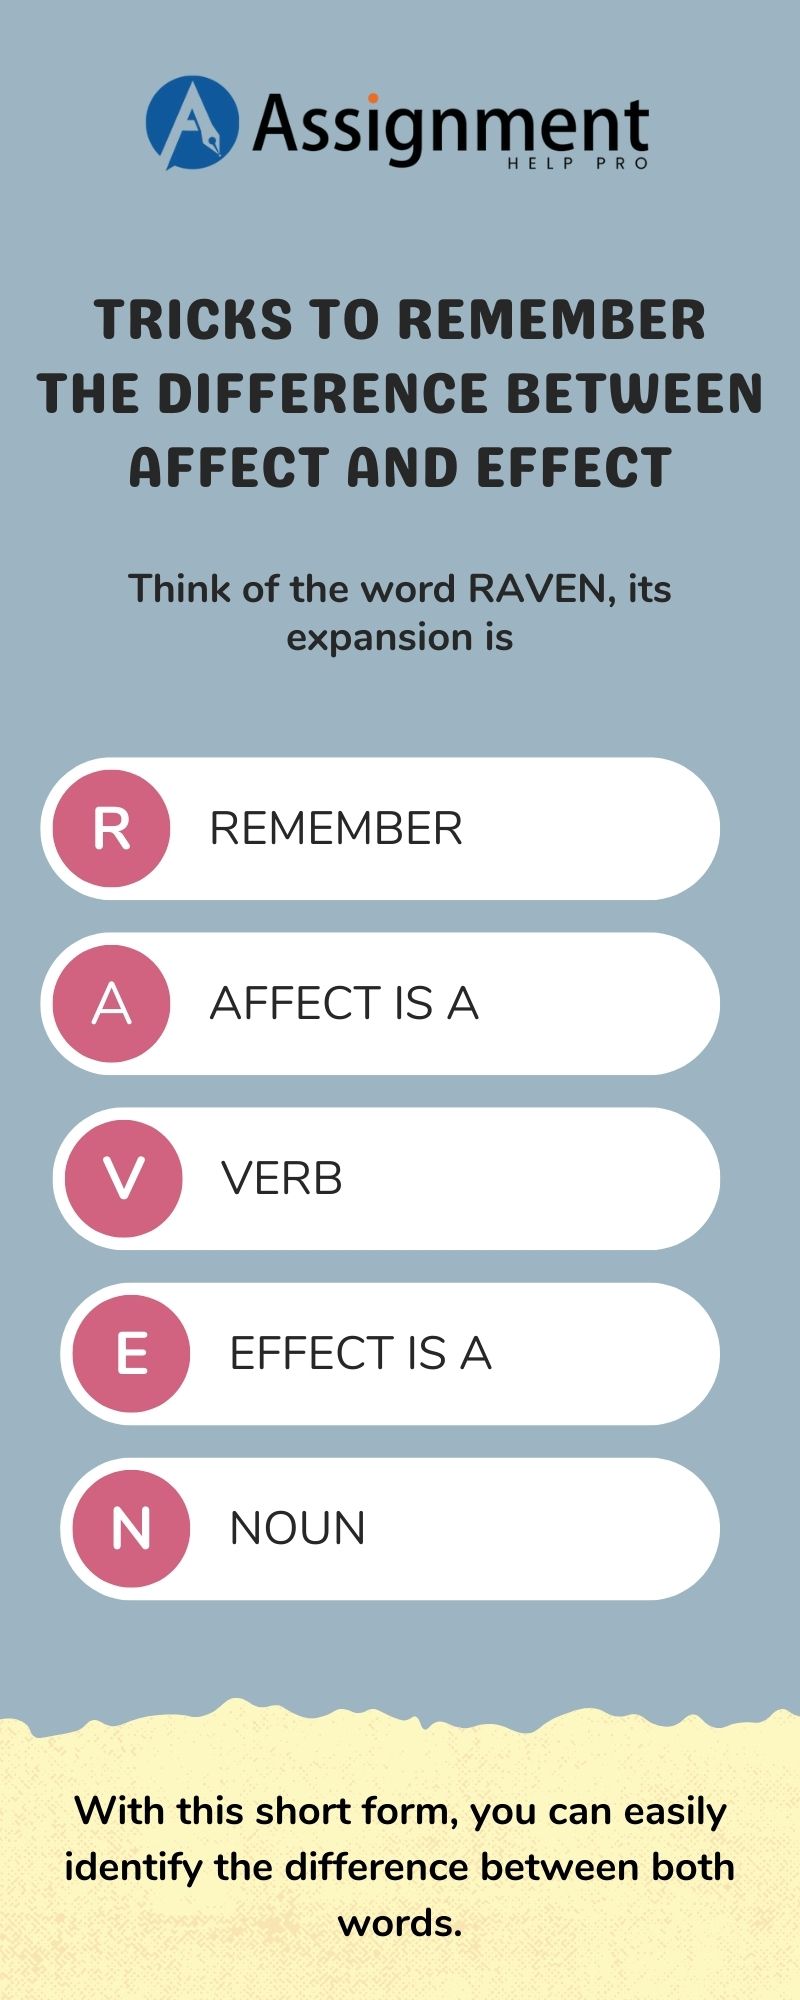 Tricks to remember the difference between Affect and Effect